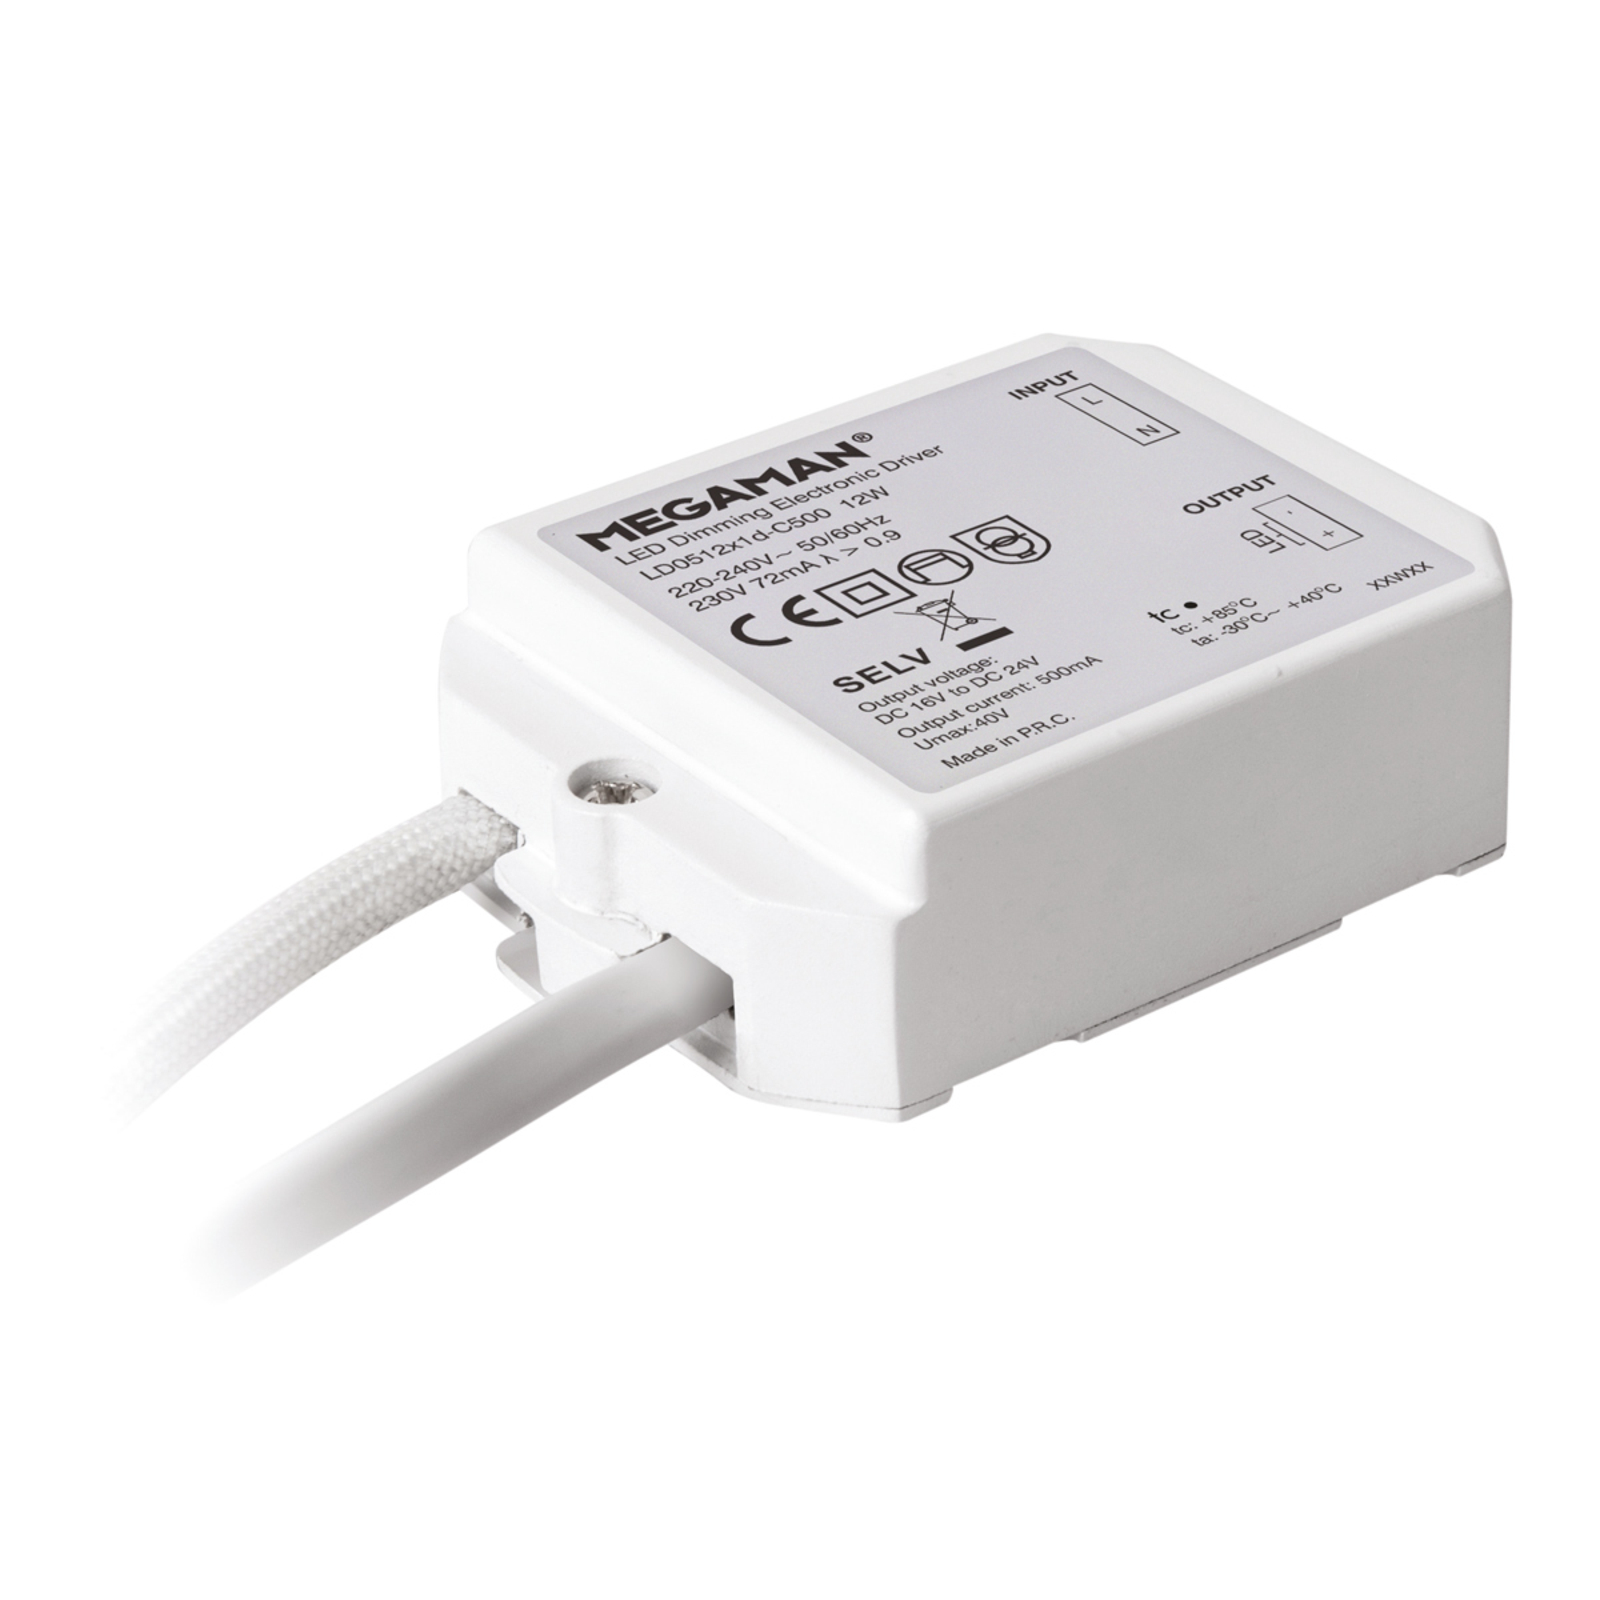 LED transformer for Rico HR, dimmable 9 W